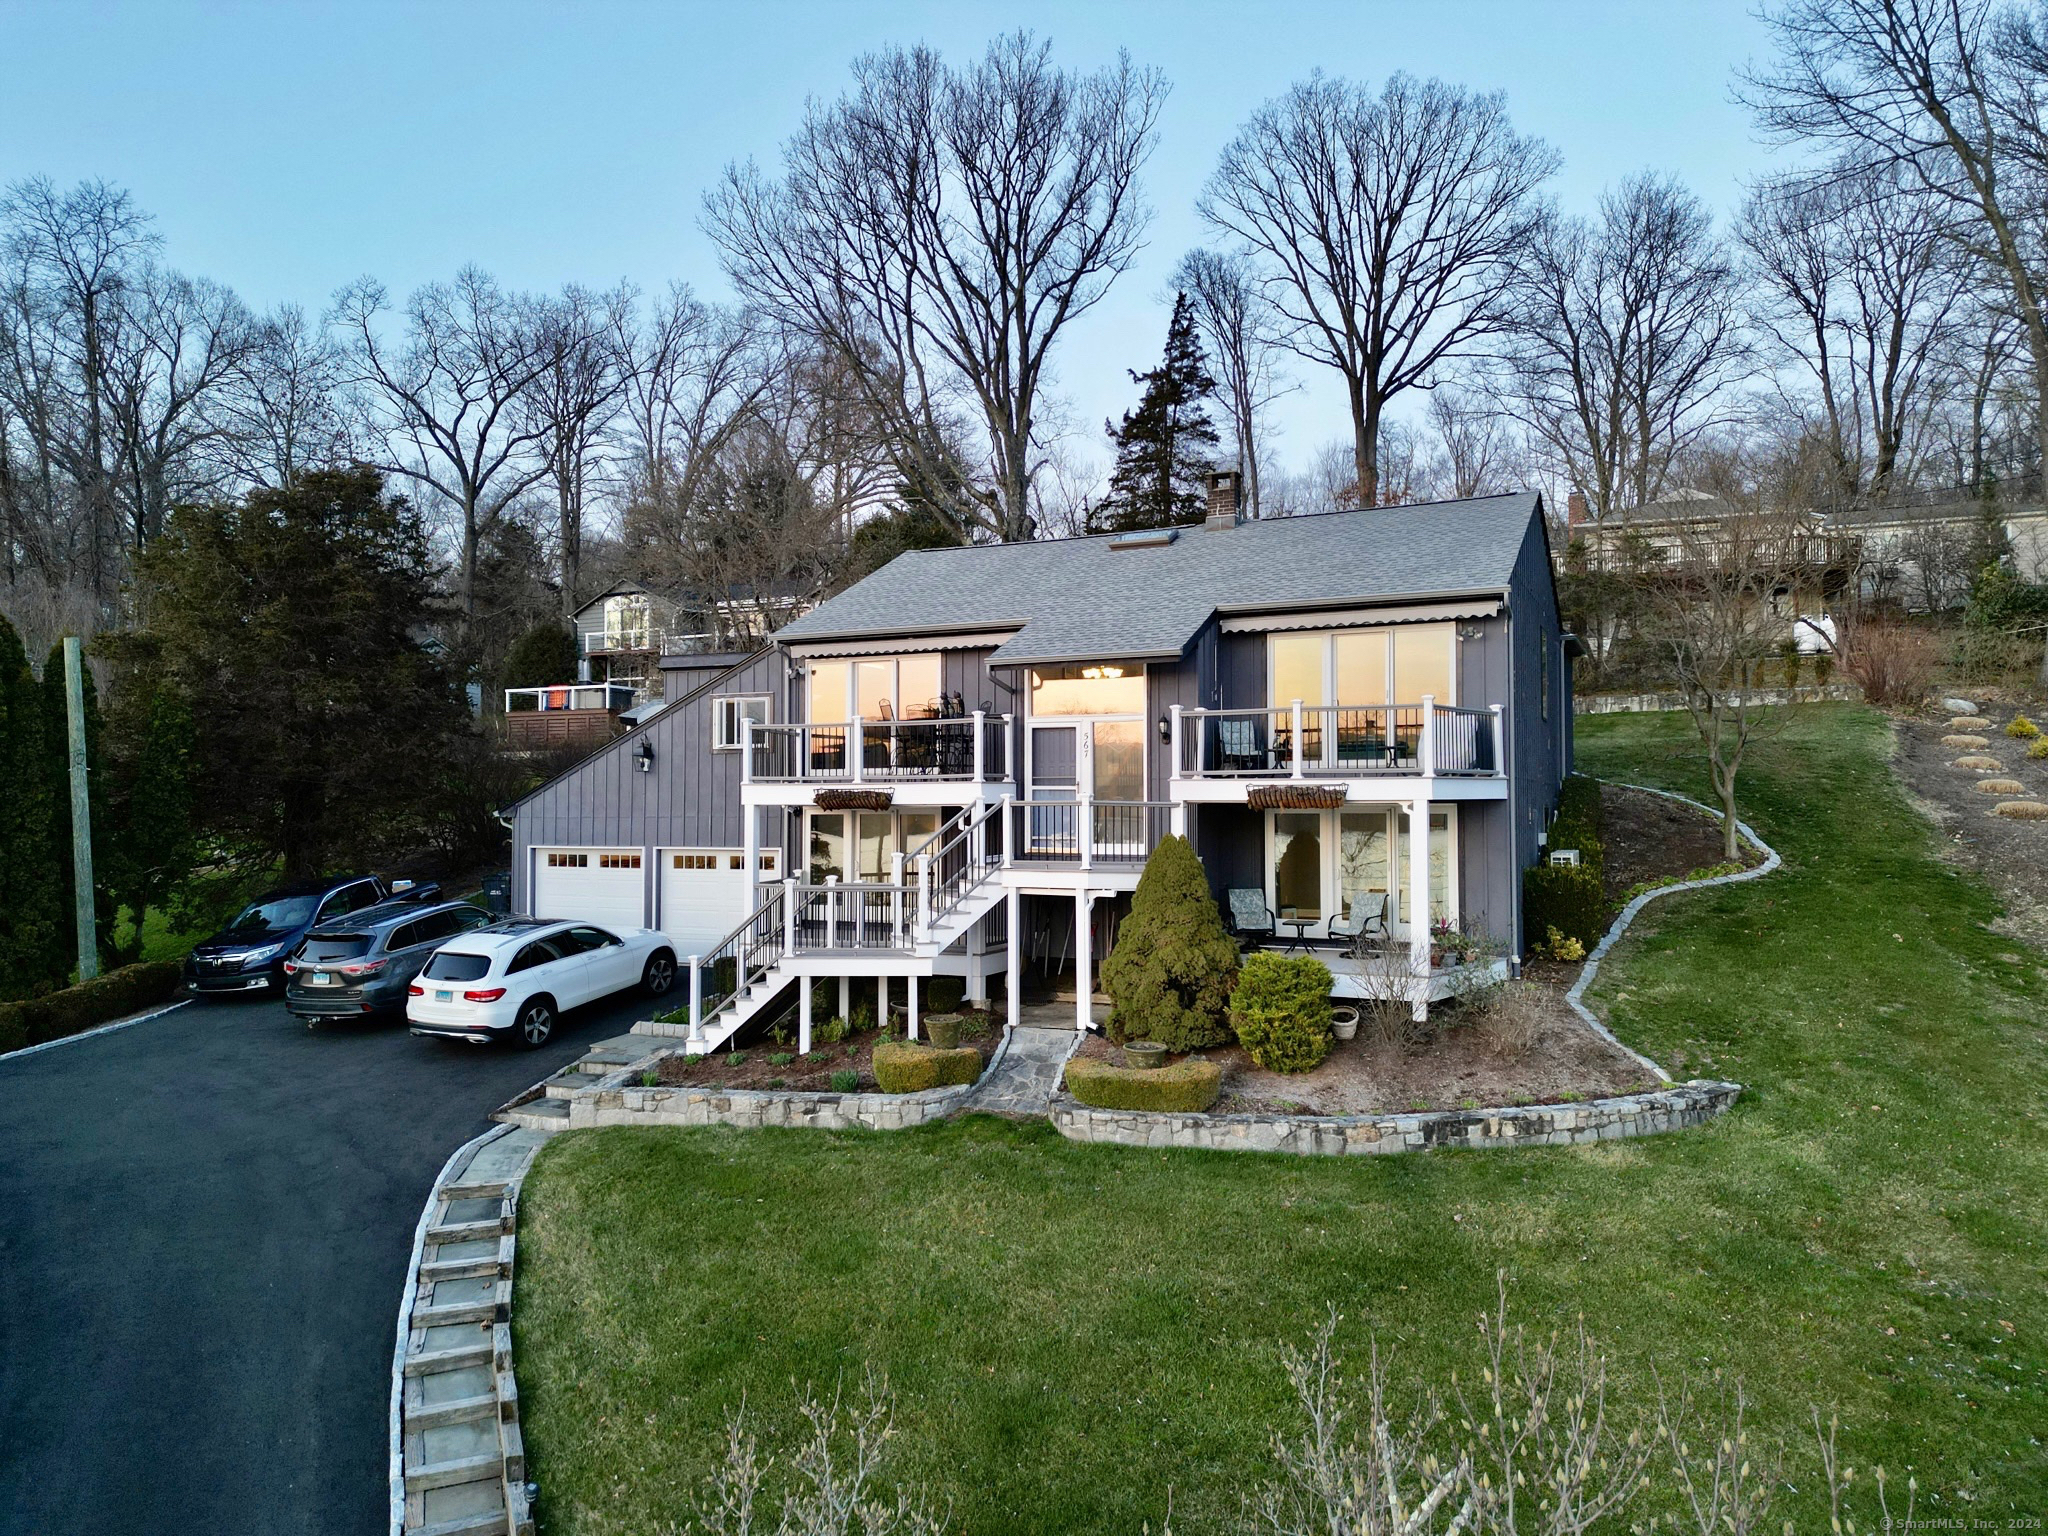 Welcome to this stunning waterfront home in the prestigious Candlewood Lake Club just 90 min from NYC. This modern residence is perfect for those seeking a tranquil lakeside retreat. The spacious common area features two adjoining living room spaces, each with sliders leading to their own deck whose hillside panoramic views provide beautiful vistas of the lake, year-round. The sleek, updated kitchen and dining area just off these living areas also open to a deck on the far side of the home, perfect for hosting large gatherings or drinks after a round of golf. The main level, primary bedroom boasts an en-suite bathroom and generous walk-in closet. The two additional bedrooms both feature walls of glass that open to their own private deck spaces. Lakeside, the screened-in gazebo, complete with fridge and electrical, offers plenty of opportunity for outdoor activities and al fresco dining. The additional stone patio, and lakeside deck provides ample space for overflow or a quiet evening by the water's edge. The firepit area and duel docks complete this waterfront package and give you the perfect place to make your vacation home dreams a reality.  Conveniently located in The Candlewood Lake Club, this home also gains you access to a range of resort-style amenities including club house events, pickleball, private beach, resident only 9 hole golf course, tennis courts, and a variety of activities for young and old alike. Embrace the waterfront lifestyle!